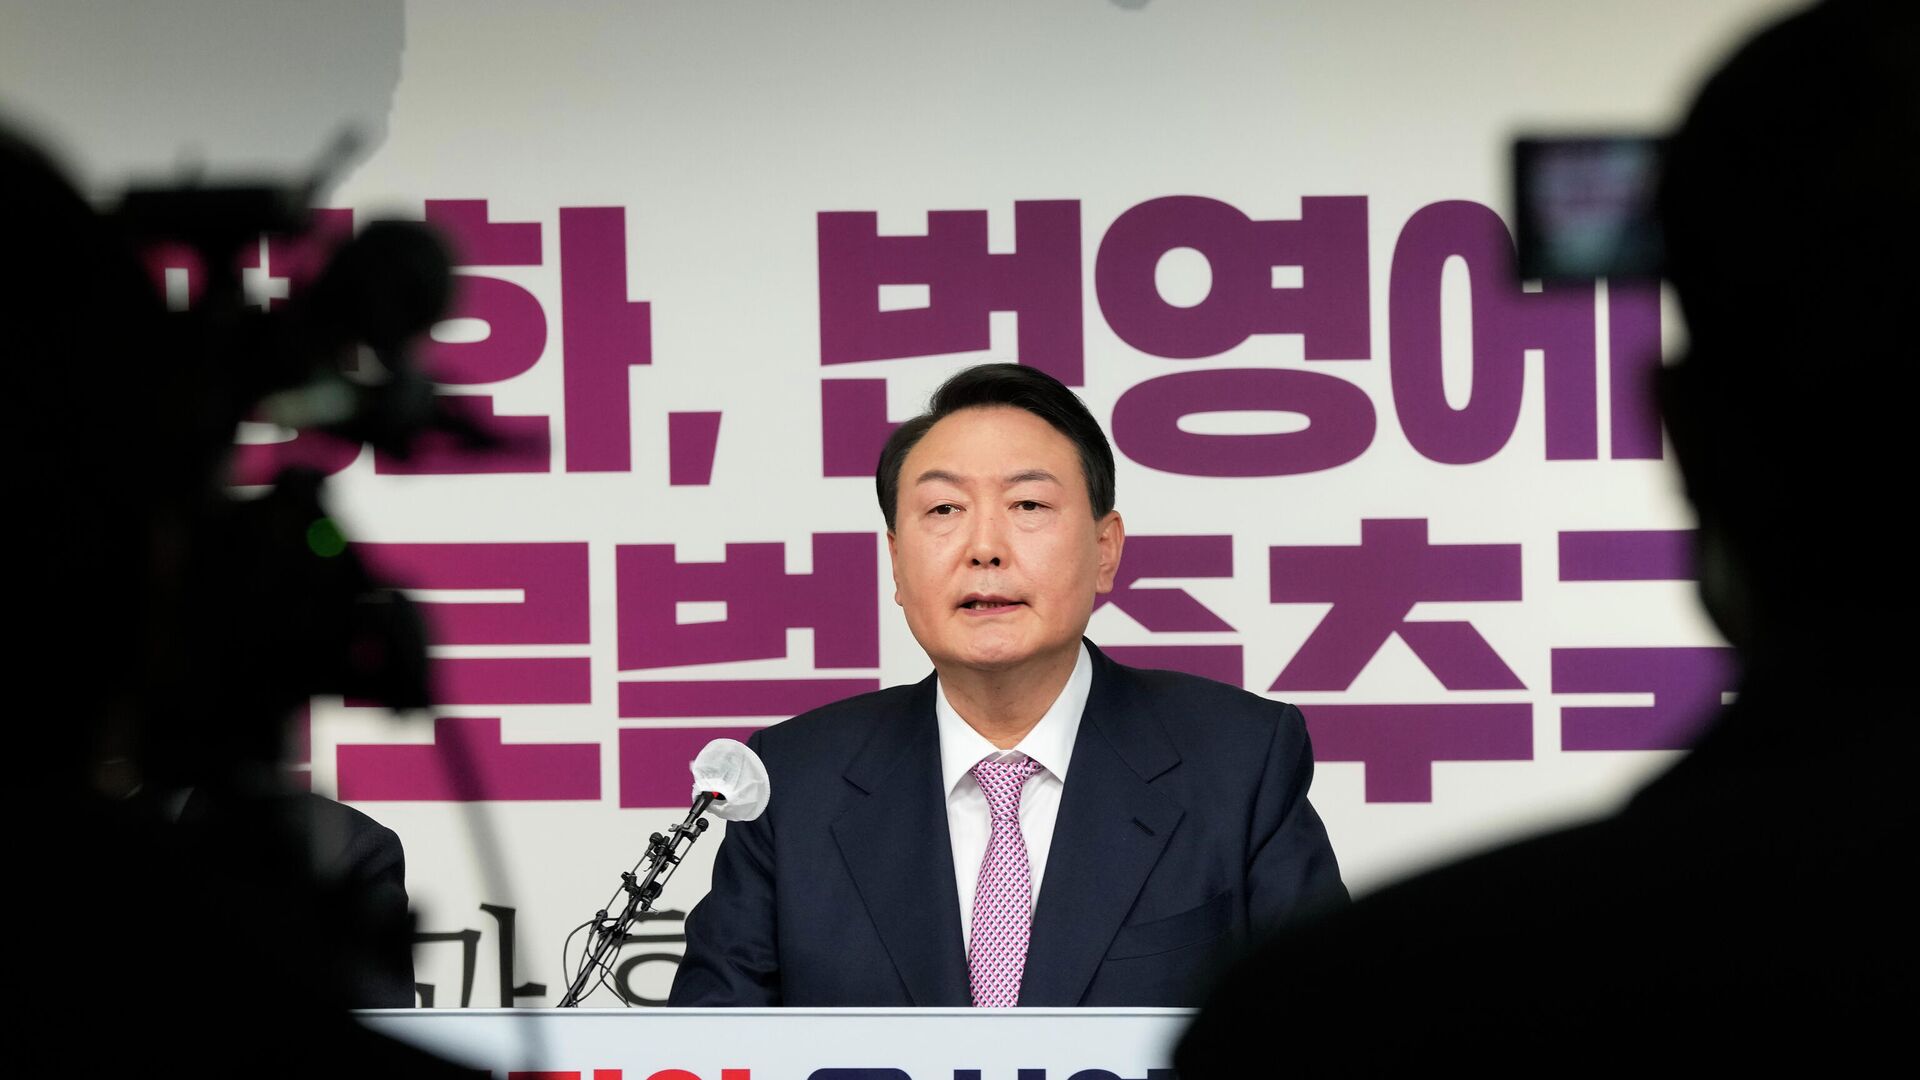 Yoon Suk Yeol, the presidential candidate of the main opposition People Power Party, speaks during a press conference at the party's headquarters in Seoul, South Korea Monday, Jan. 24, 2022. - Sputnik International, 1920, 20.02.2022